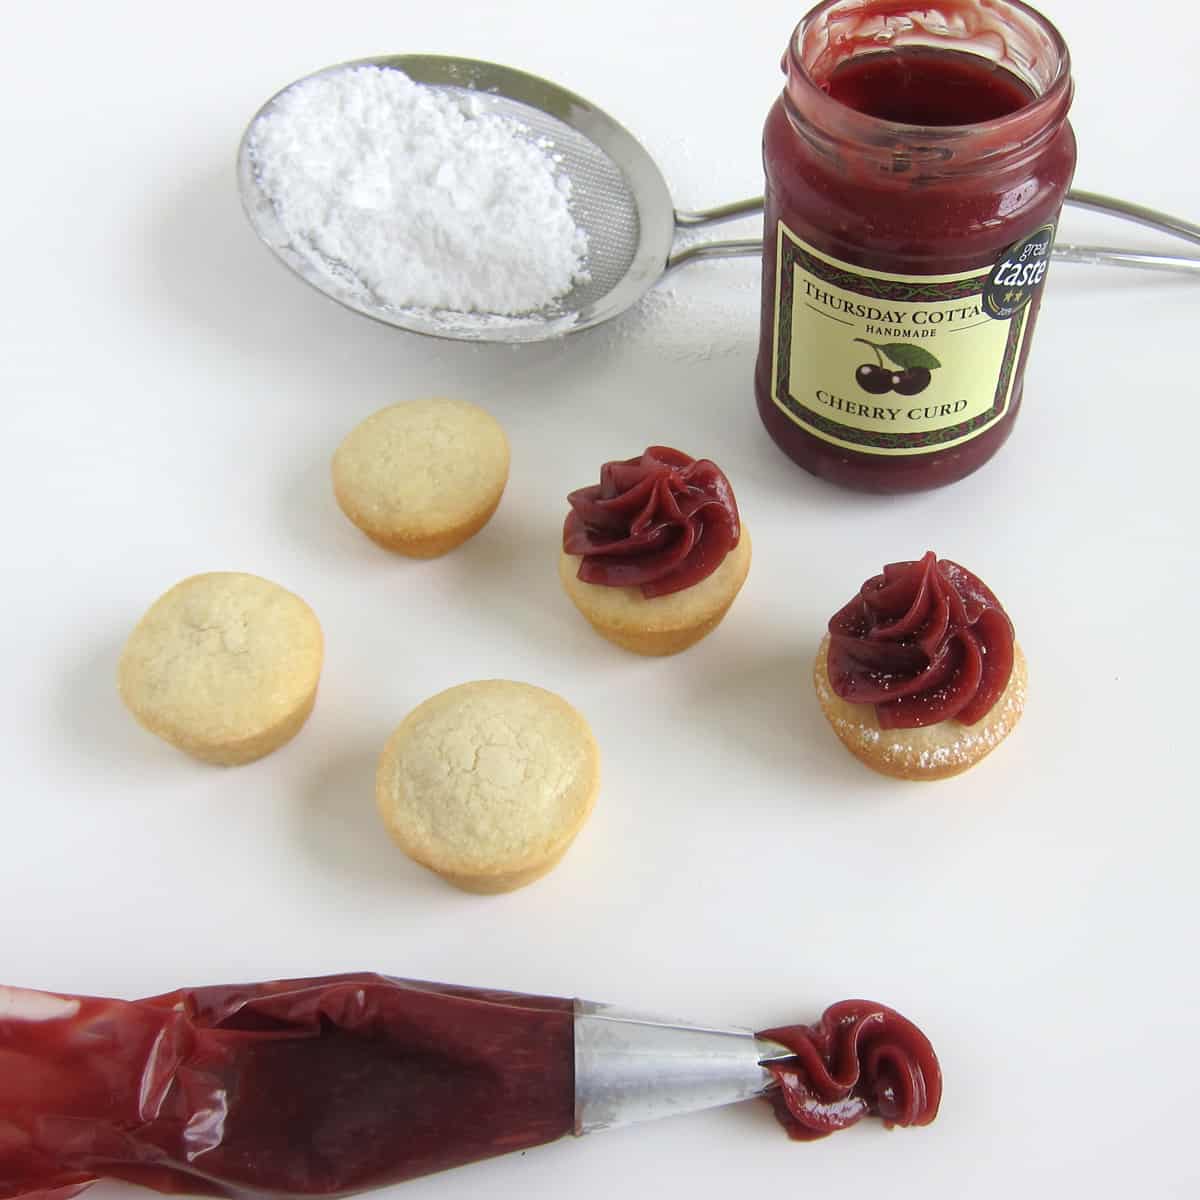 Pipe cherry curd on top of sugar cookie cups then dust with powdered sugar.